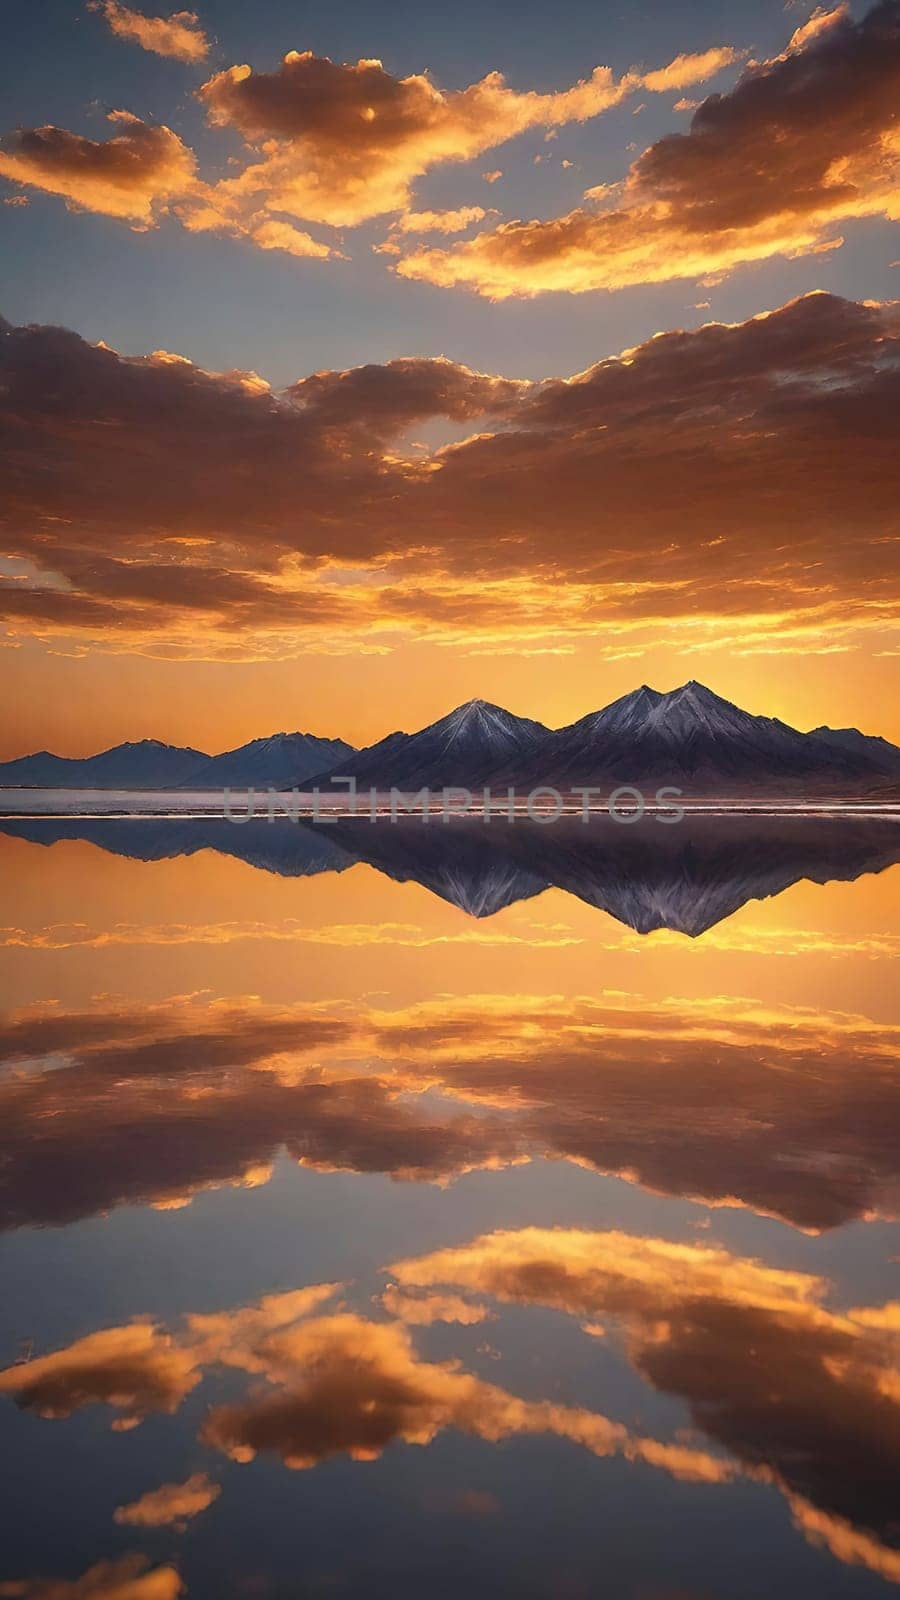 Sunset reflected in a lake with clouds and mountains in the background